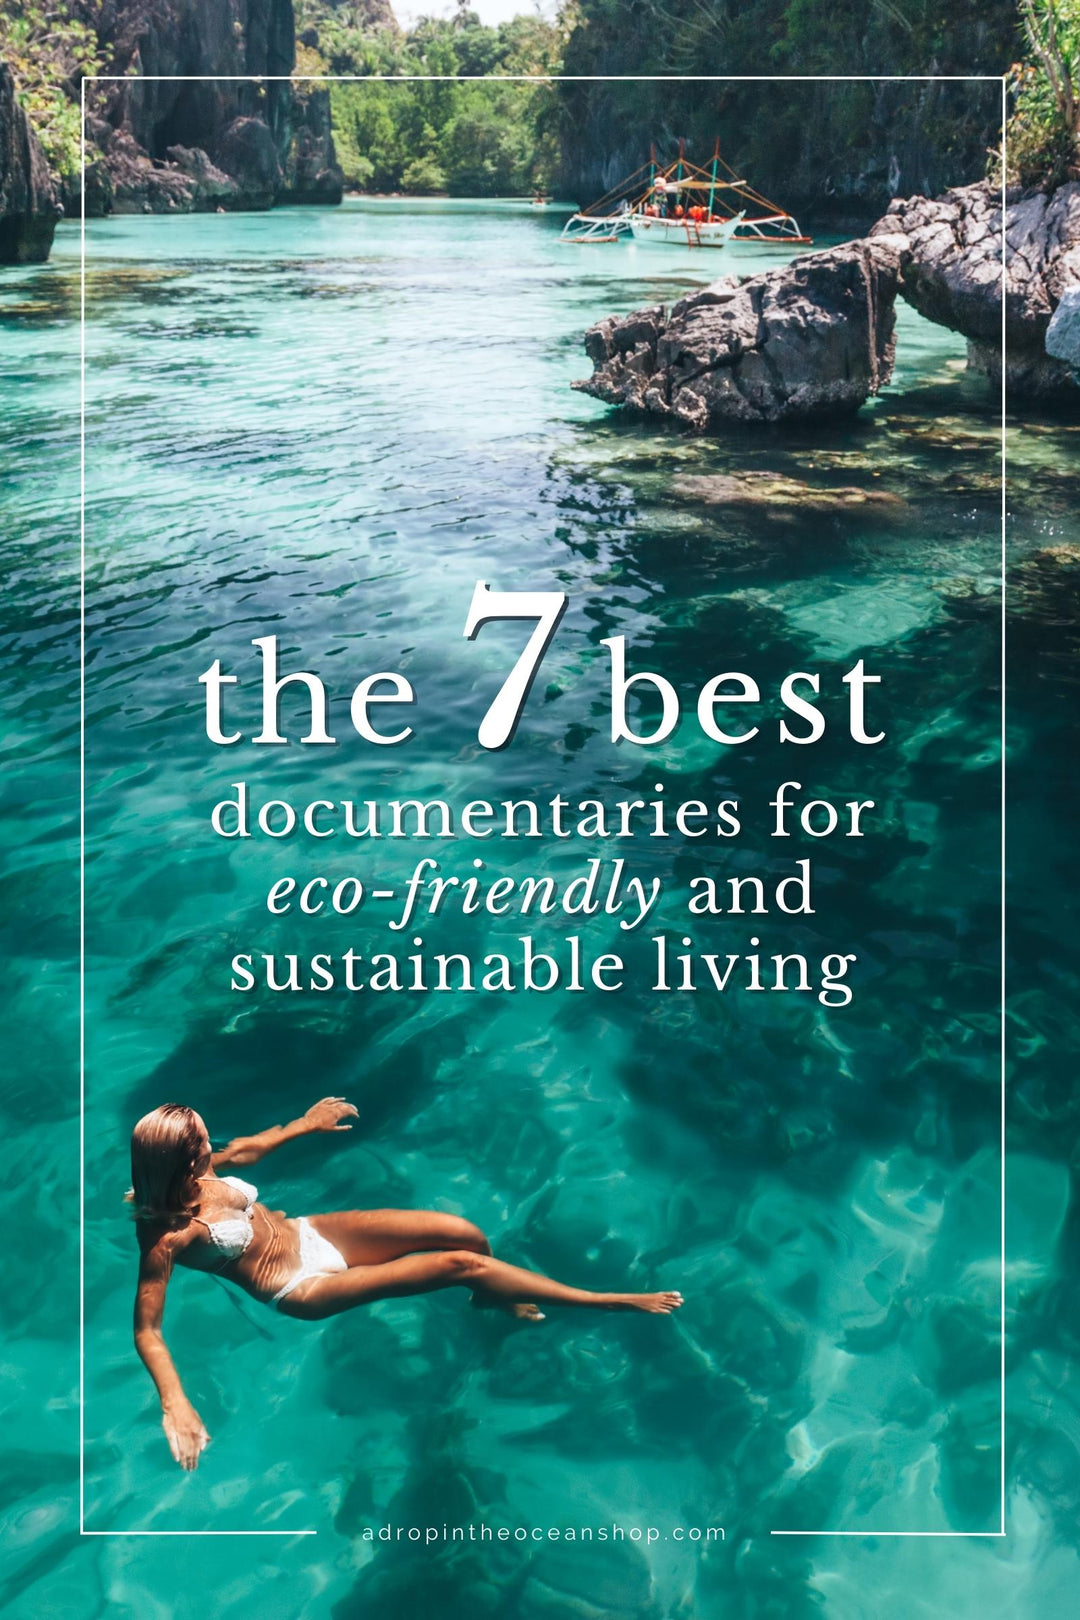 The 7 Best Documentaries for Sustainable & Eco-Friendly Living